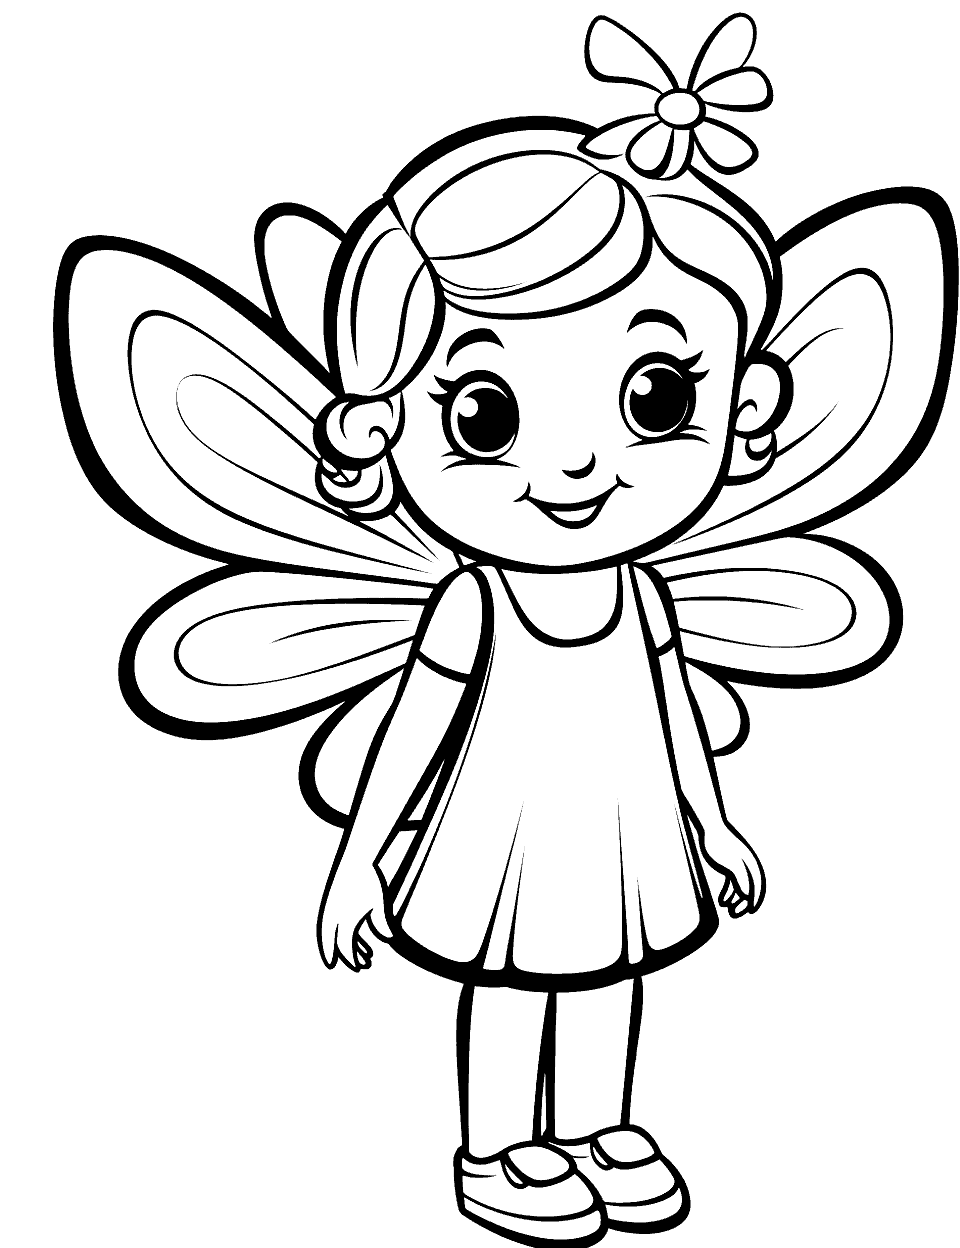 Simple Fairy Coloring Page - A simple to-draw fairy.